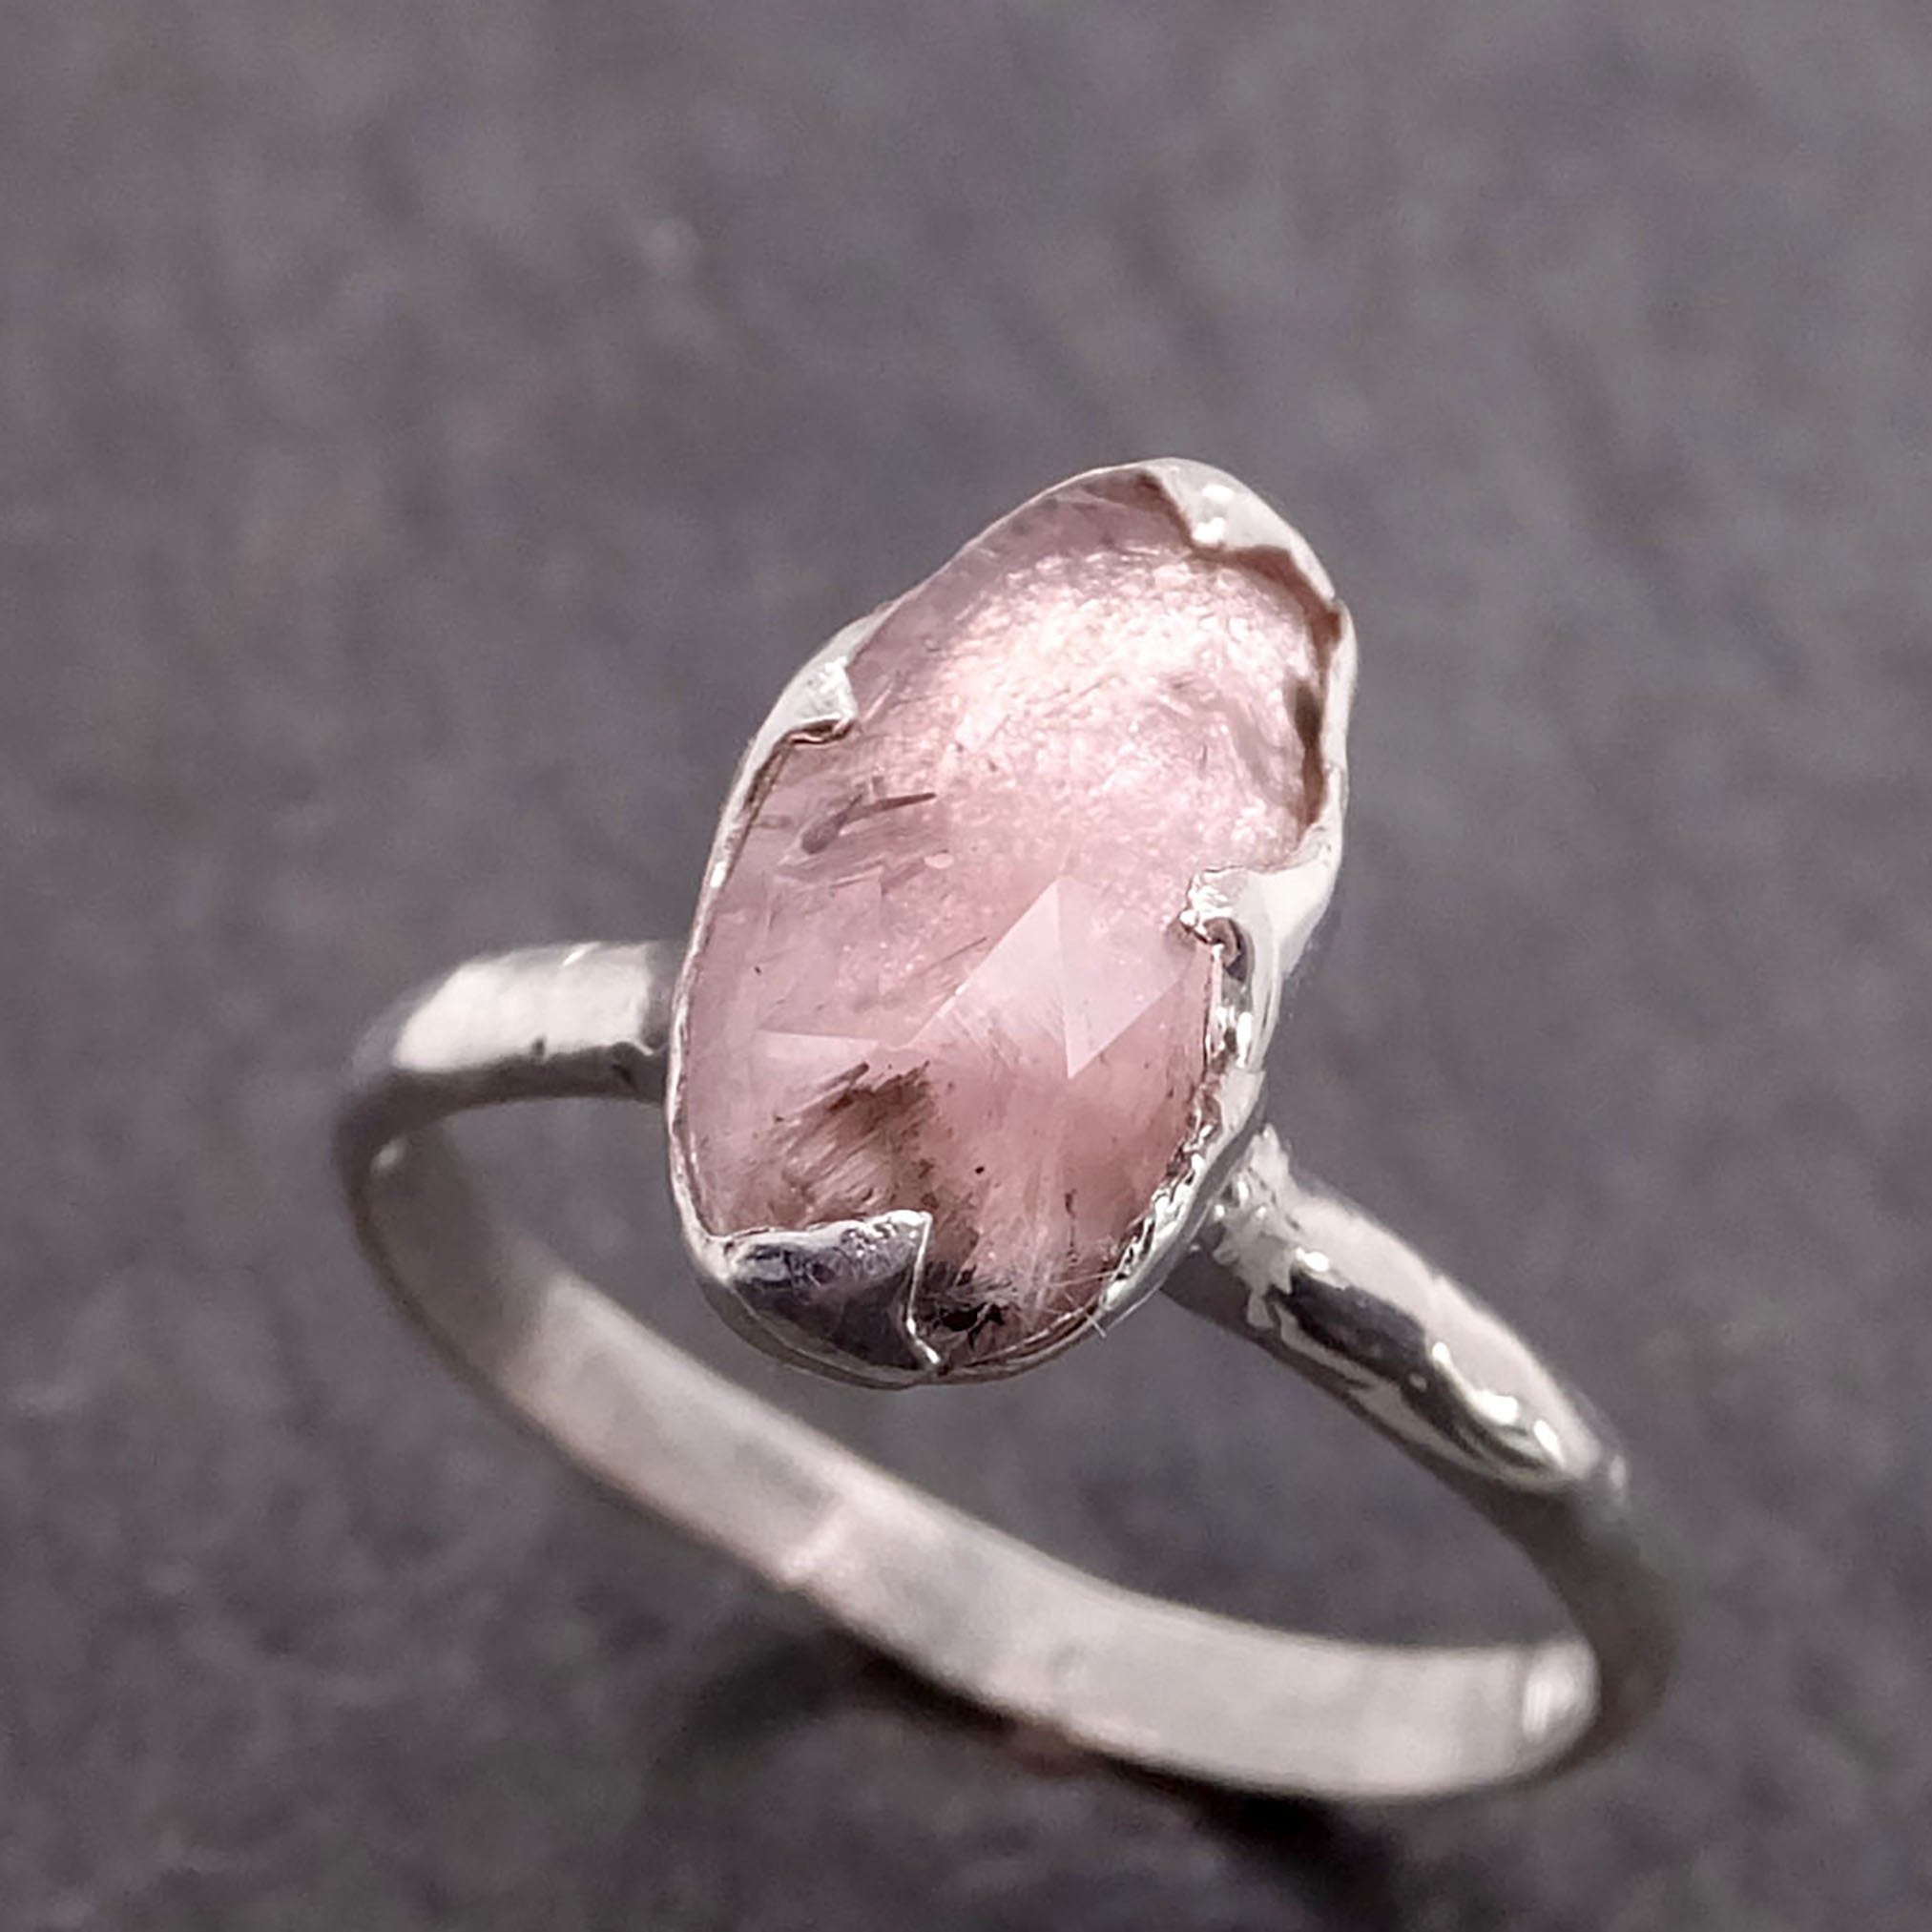 Fancy cut Pink Tourmaline Sterling Silver Ring Gemstone Solitaire recycled cocktail statement SS00036